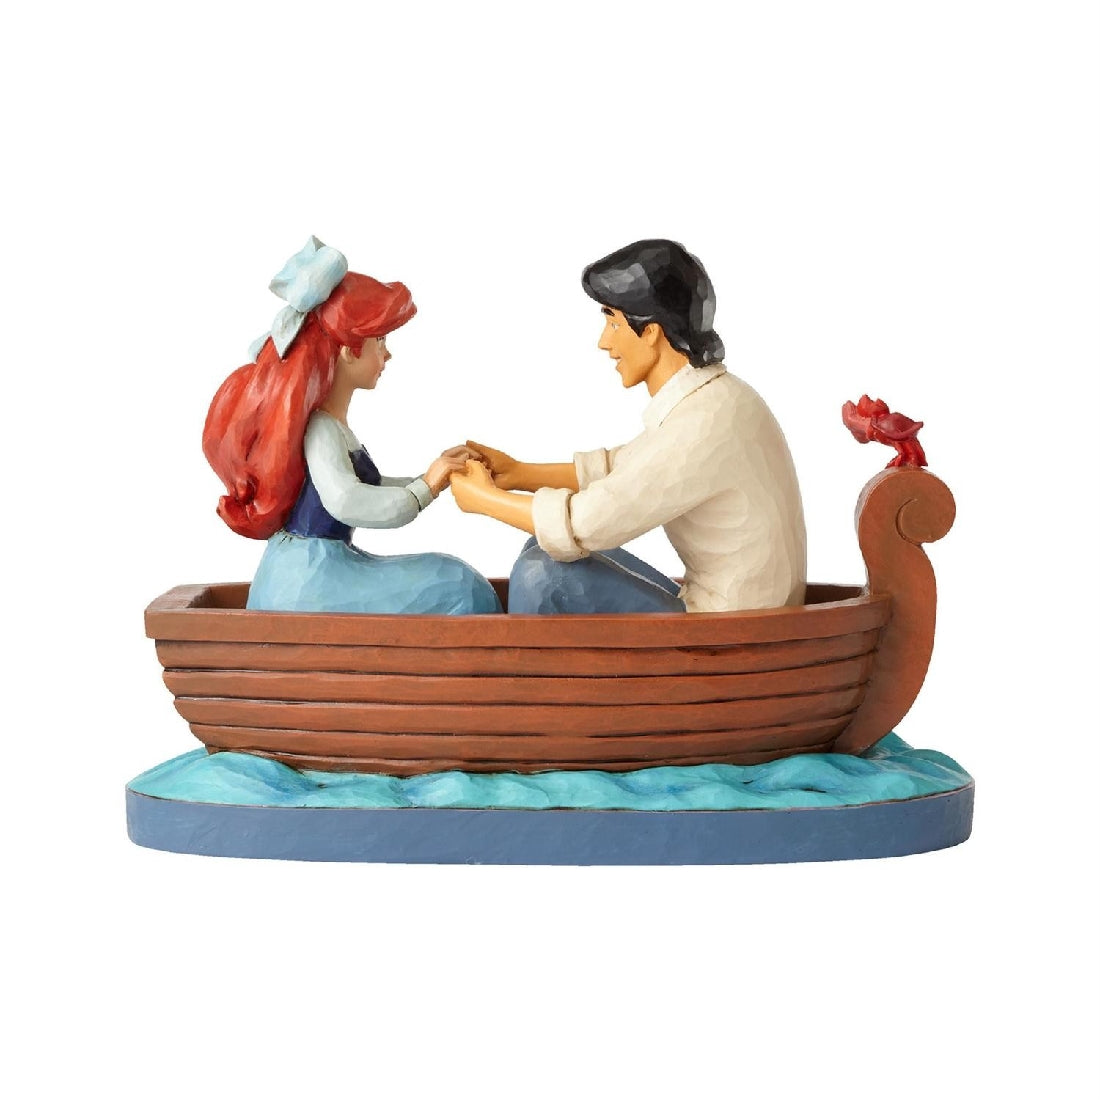 ariel the little mermaid and eric on the boat